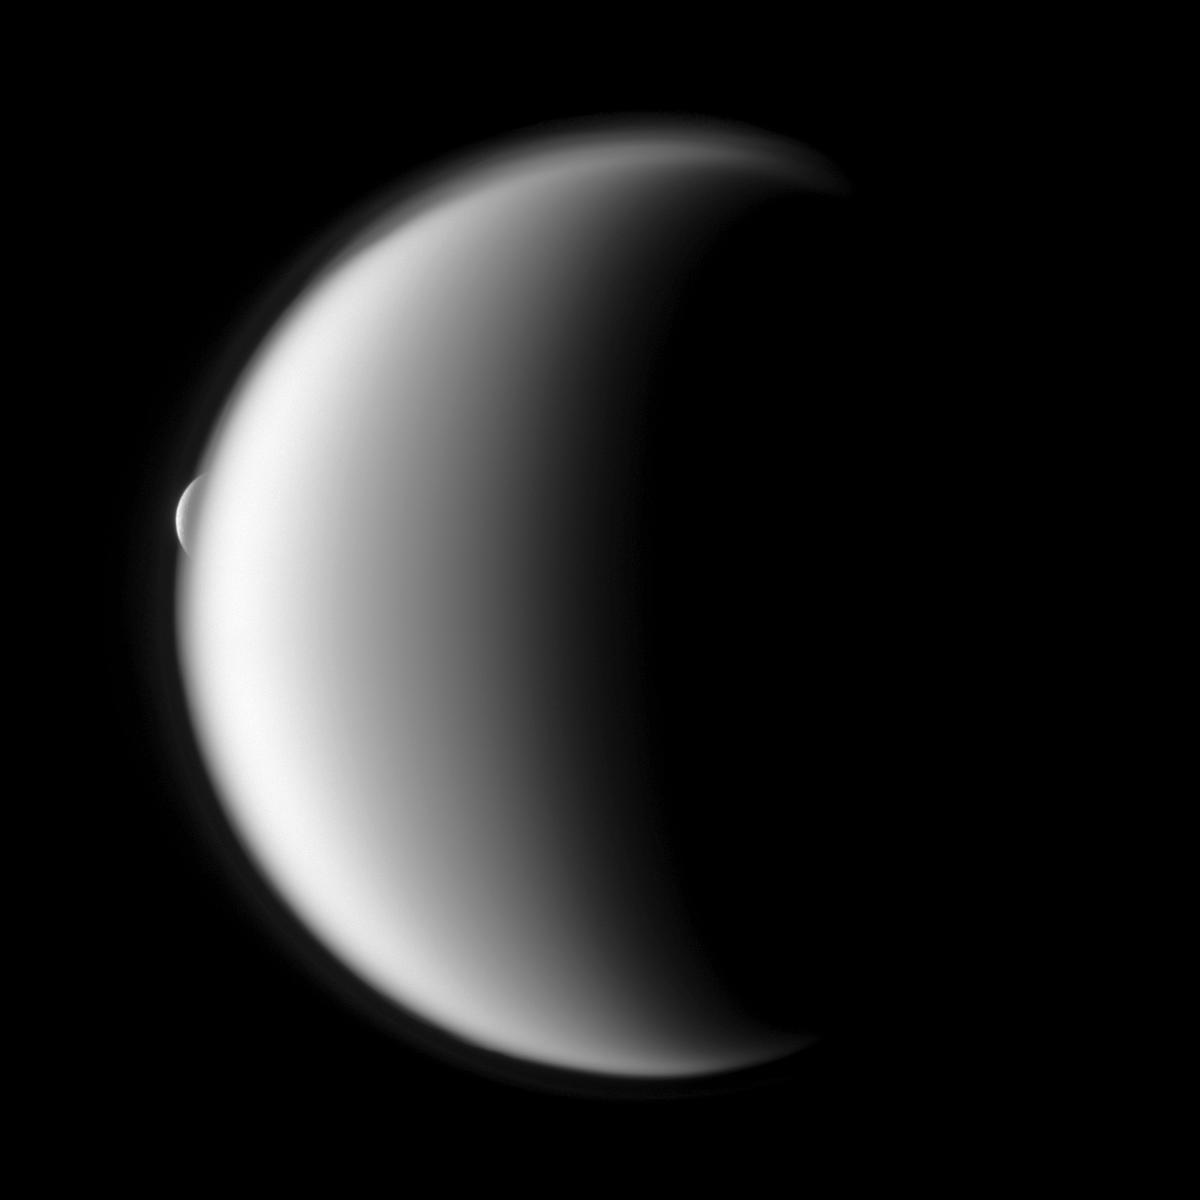 Rhea emerges after being occulted by the larger moon Titan